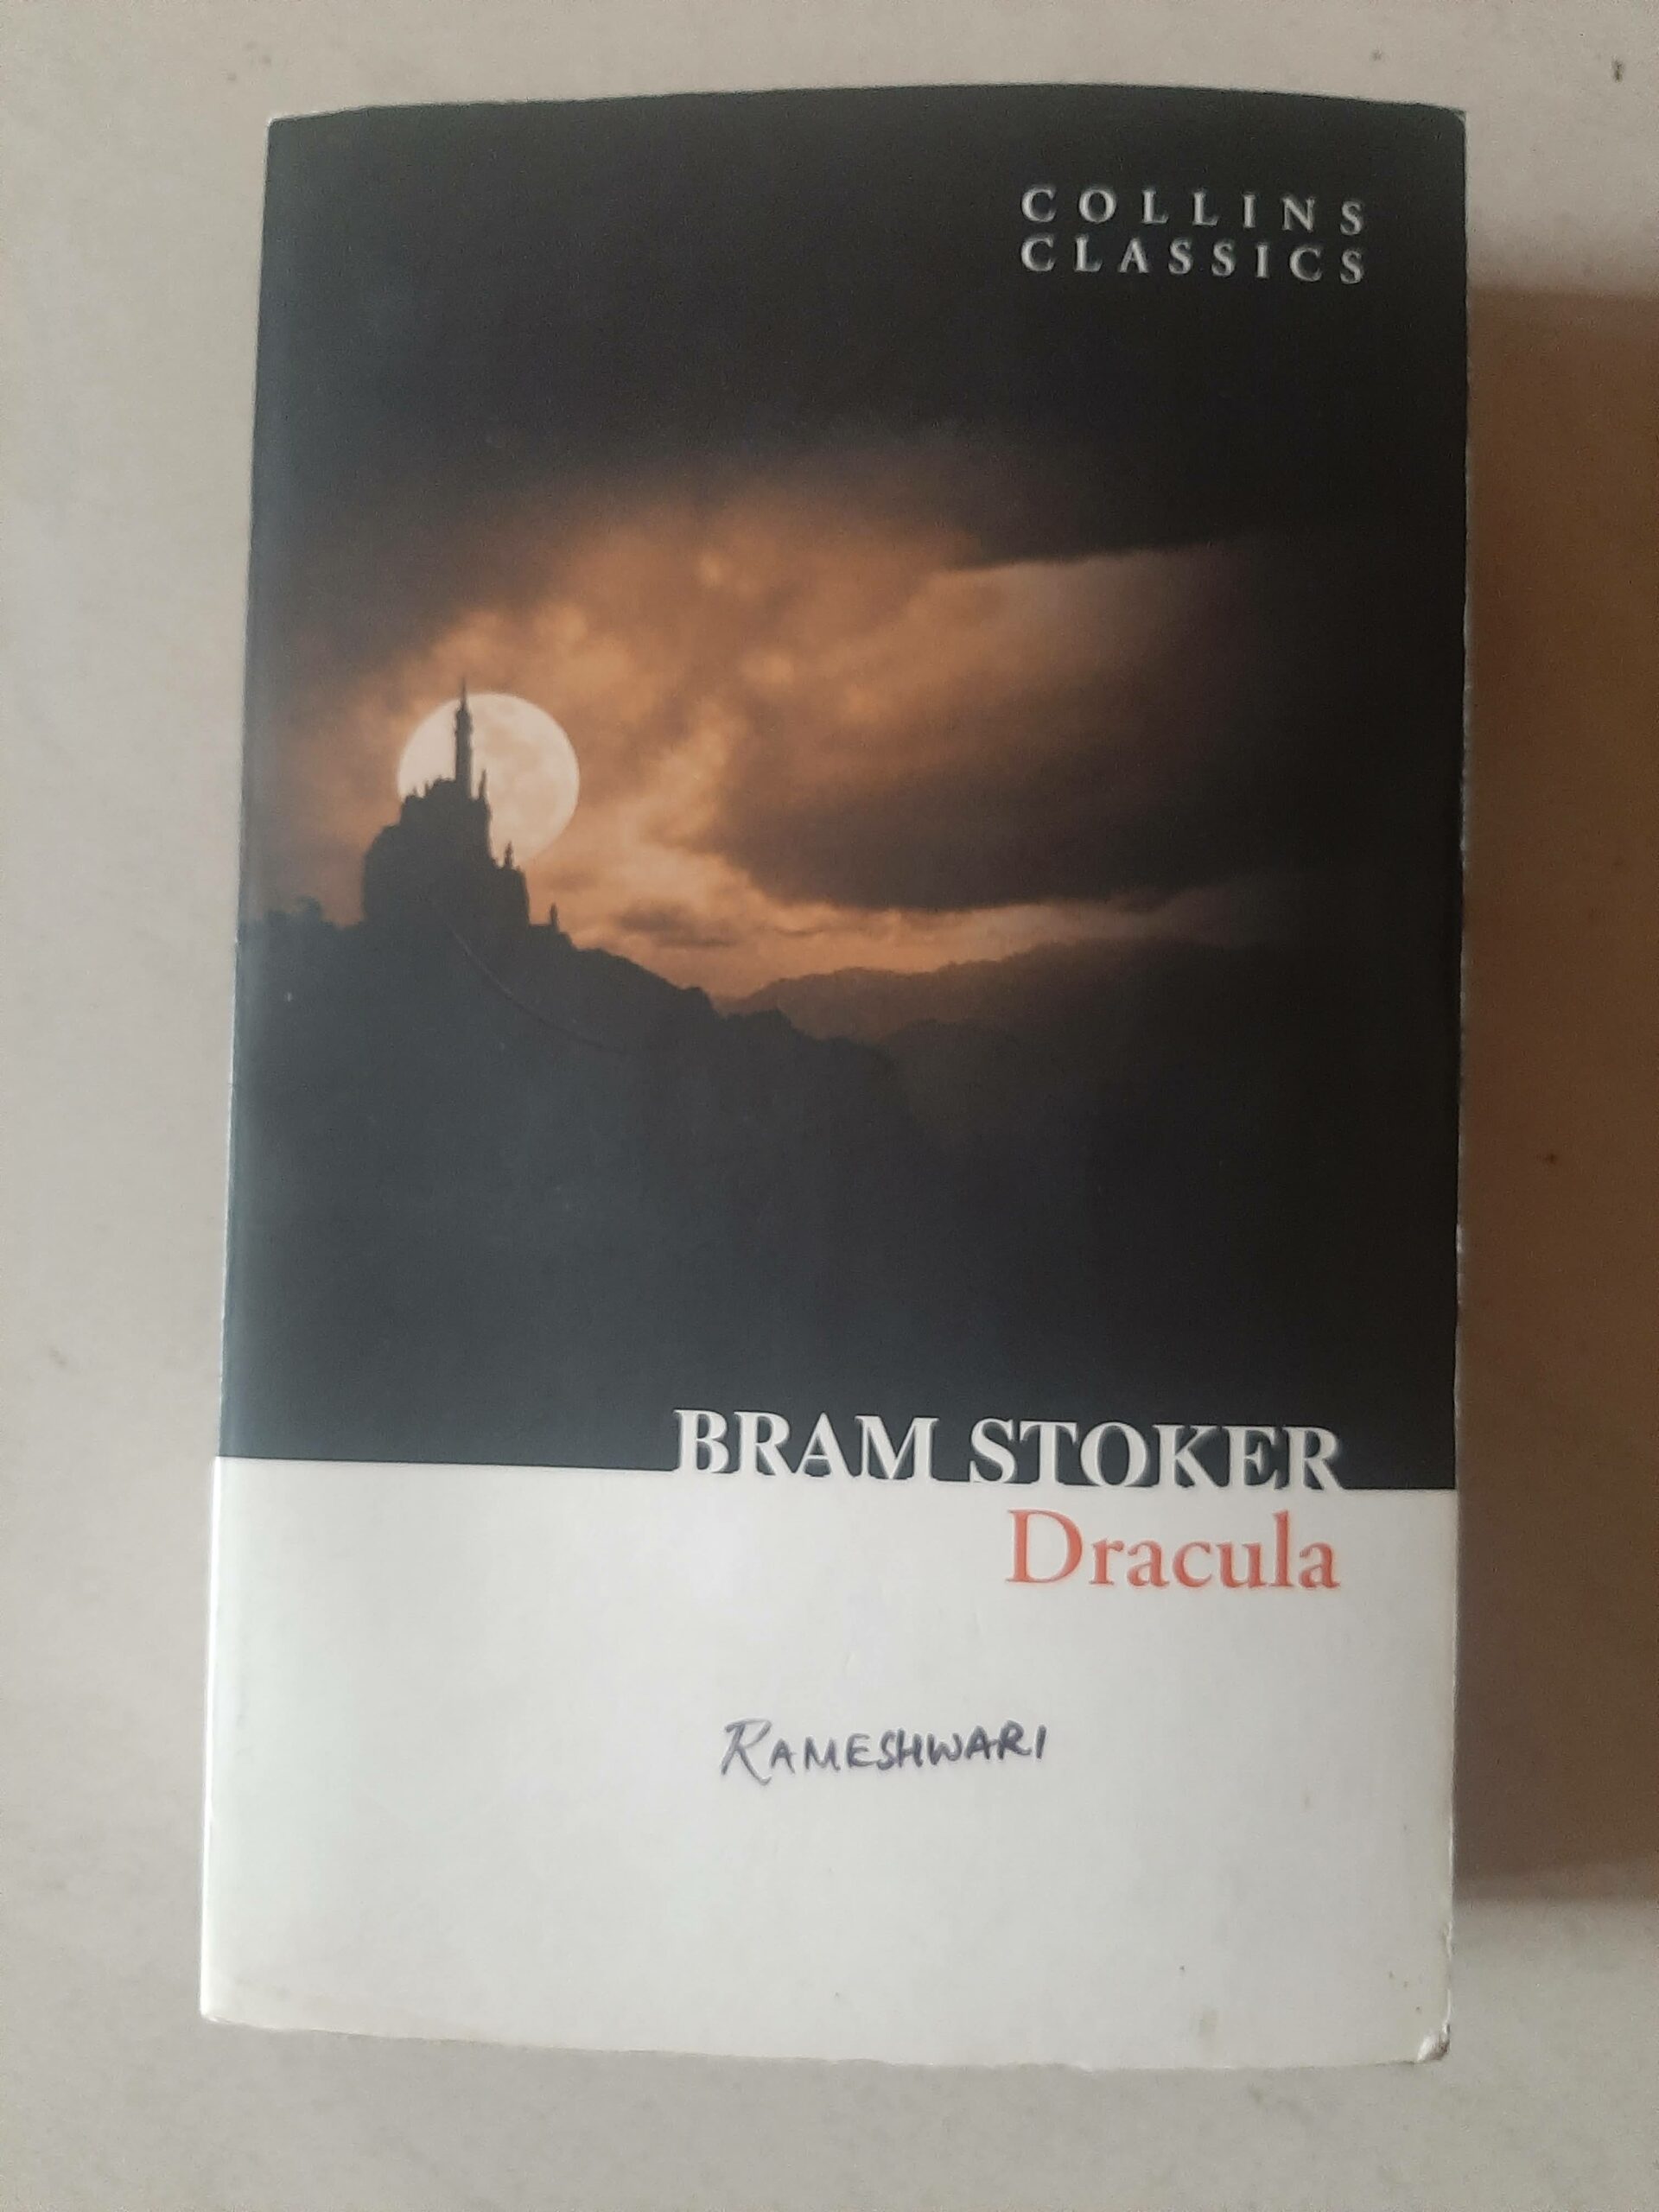 Books　Hand　Stoker　Online　Buy　Brem　Used　Dracula　Book　Second